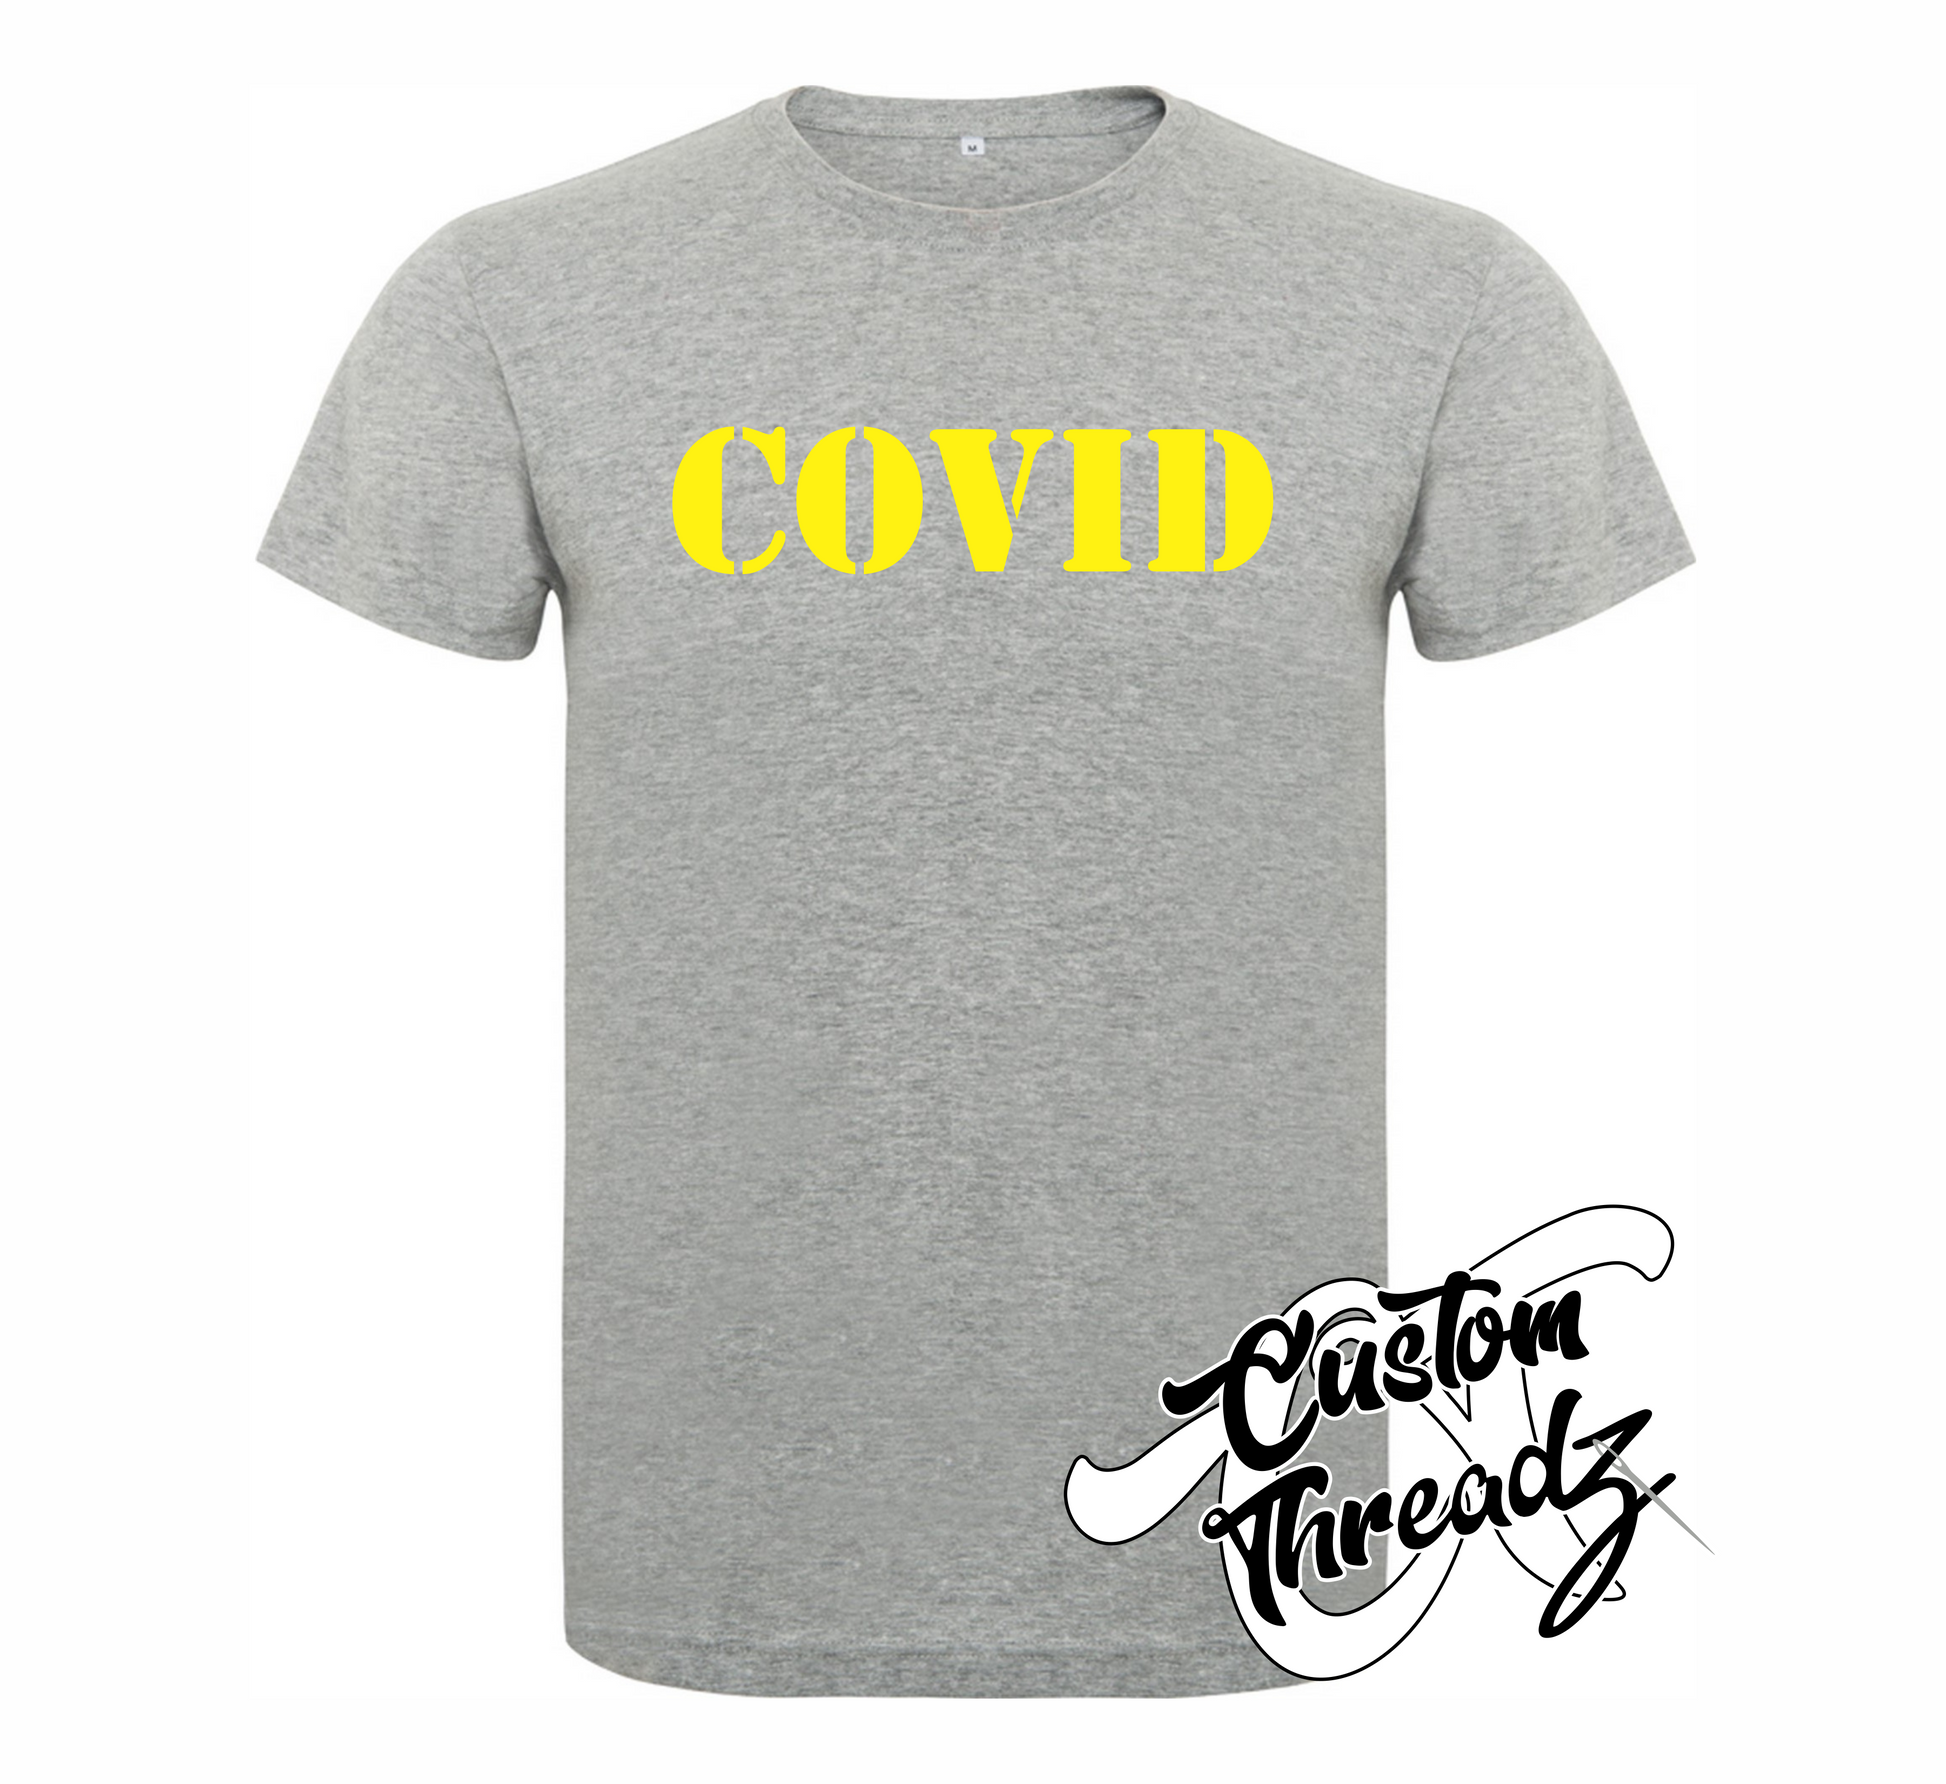 athletic heather tee with covid DTG printed design